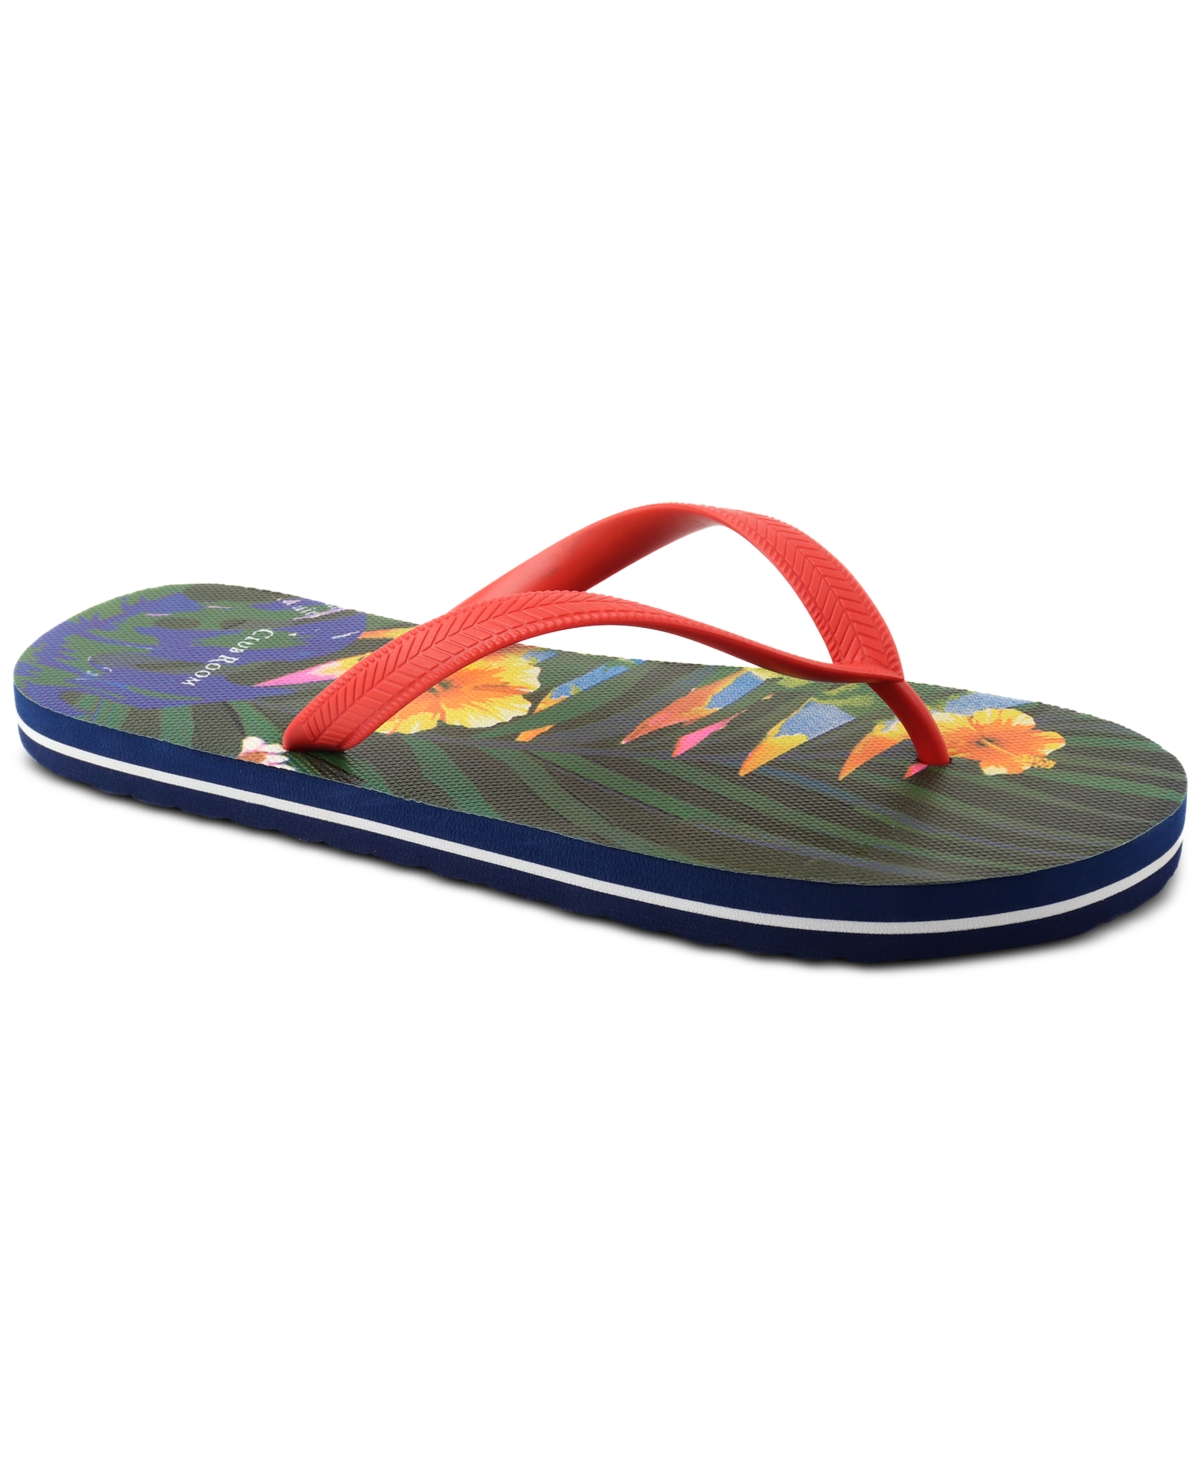 Club Room Men's Santino Flip-flop Sandal, Created For Macy's In Navy Floral